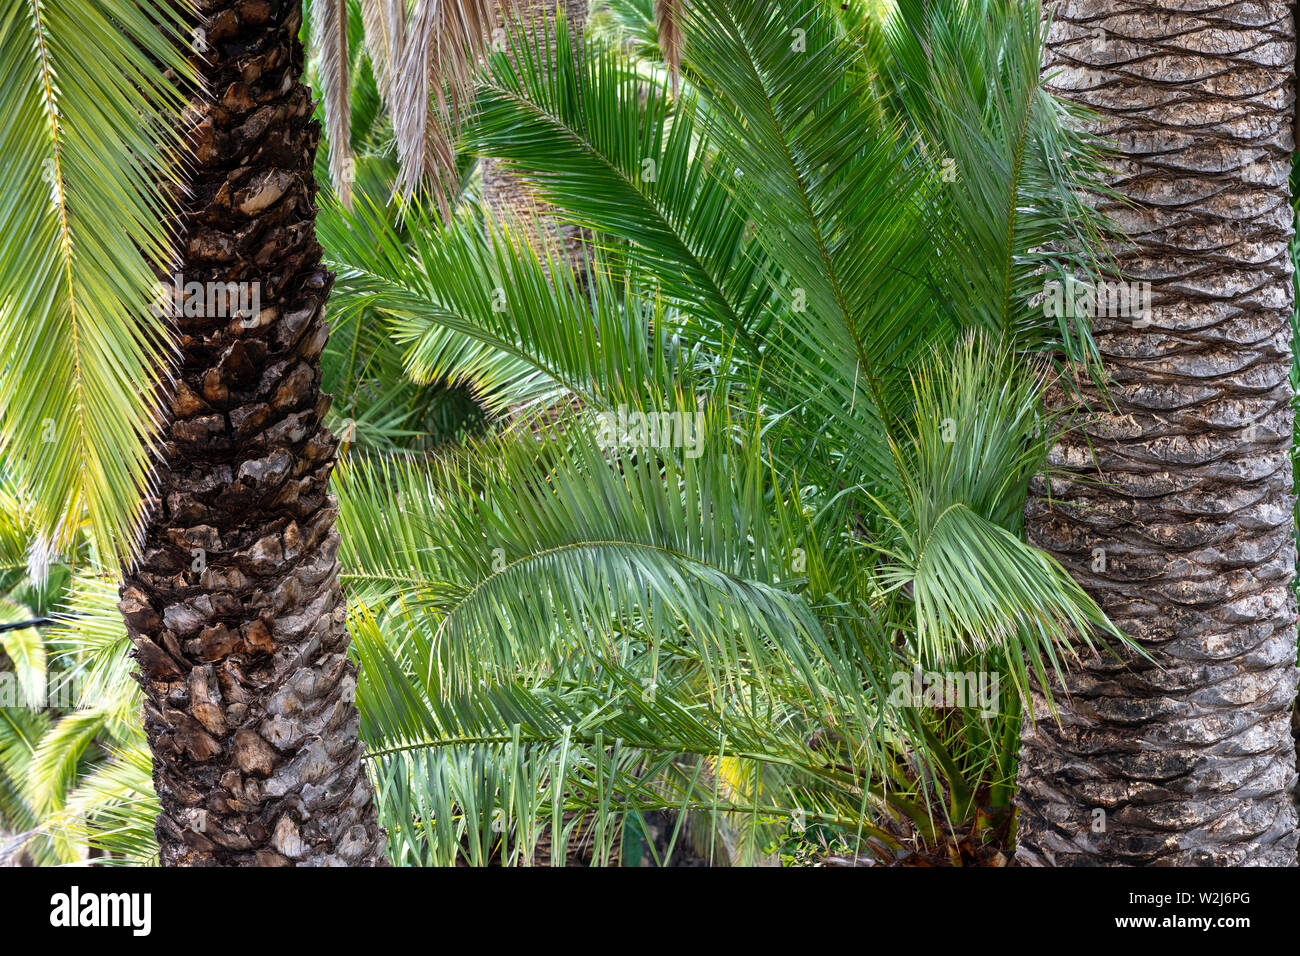 wild tropical vegetation with natural plants and greenery Stock Photo